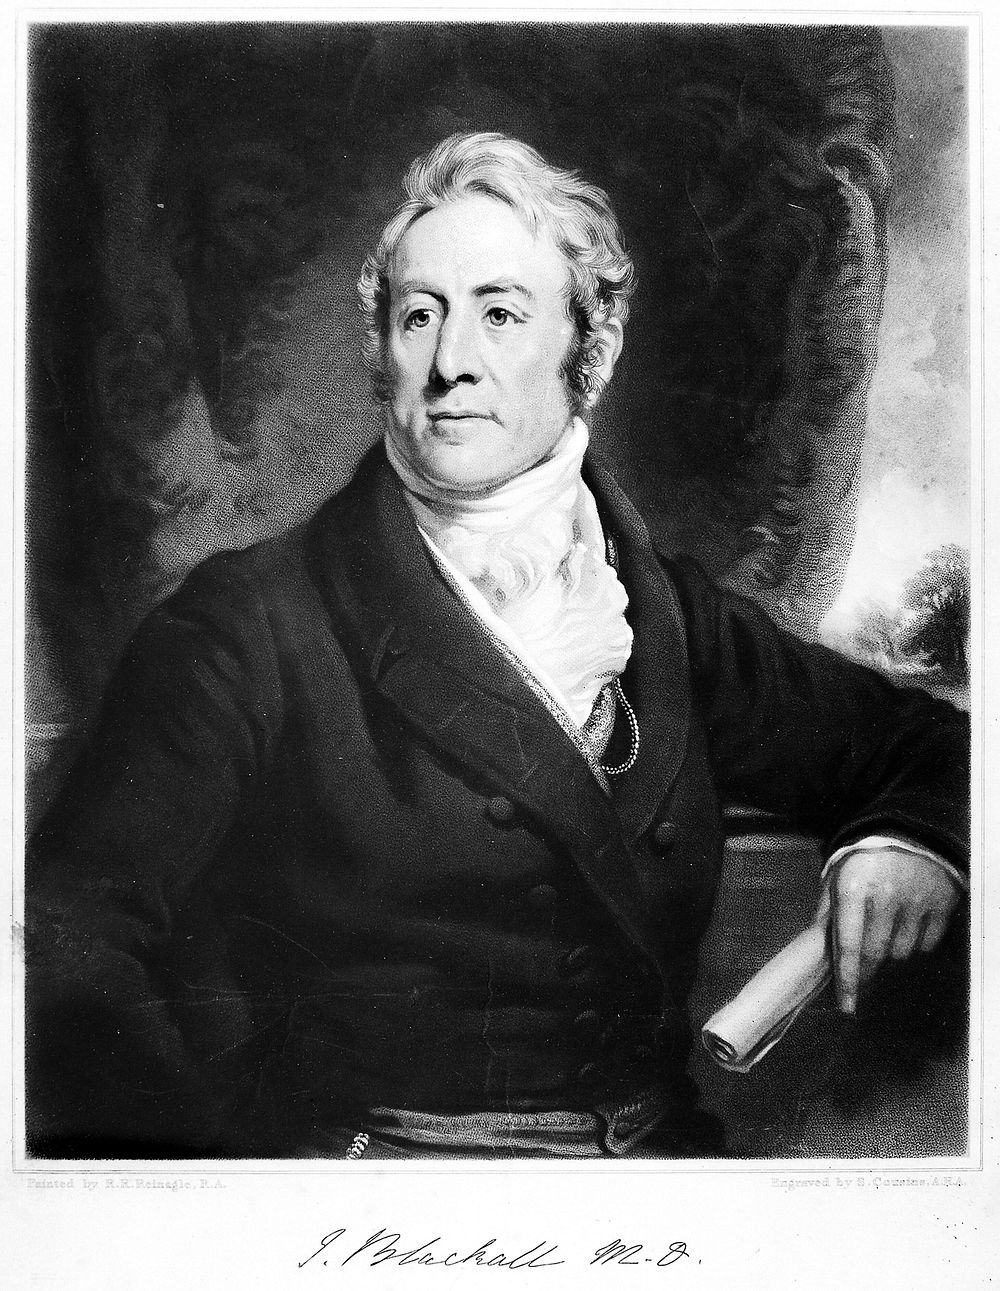 John Blackall. Lithograph by S. Cousins, 1844, after R. R. Reinagle.